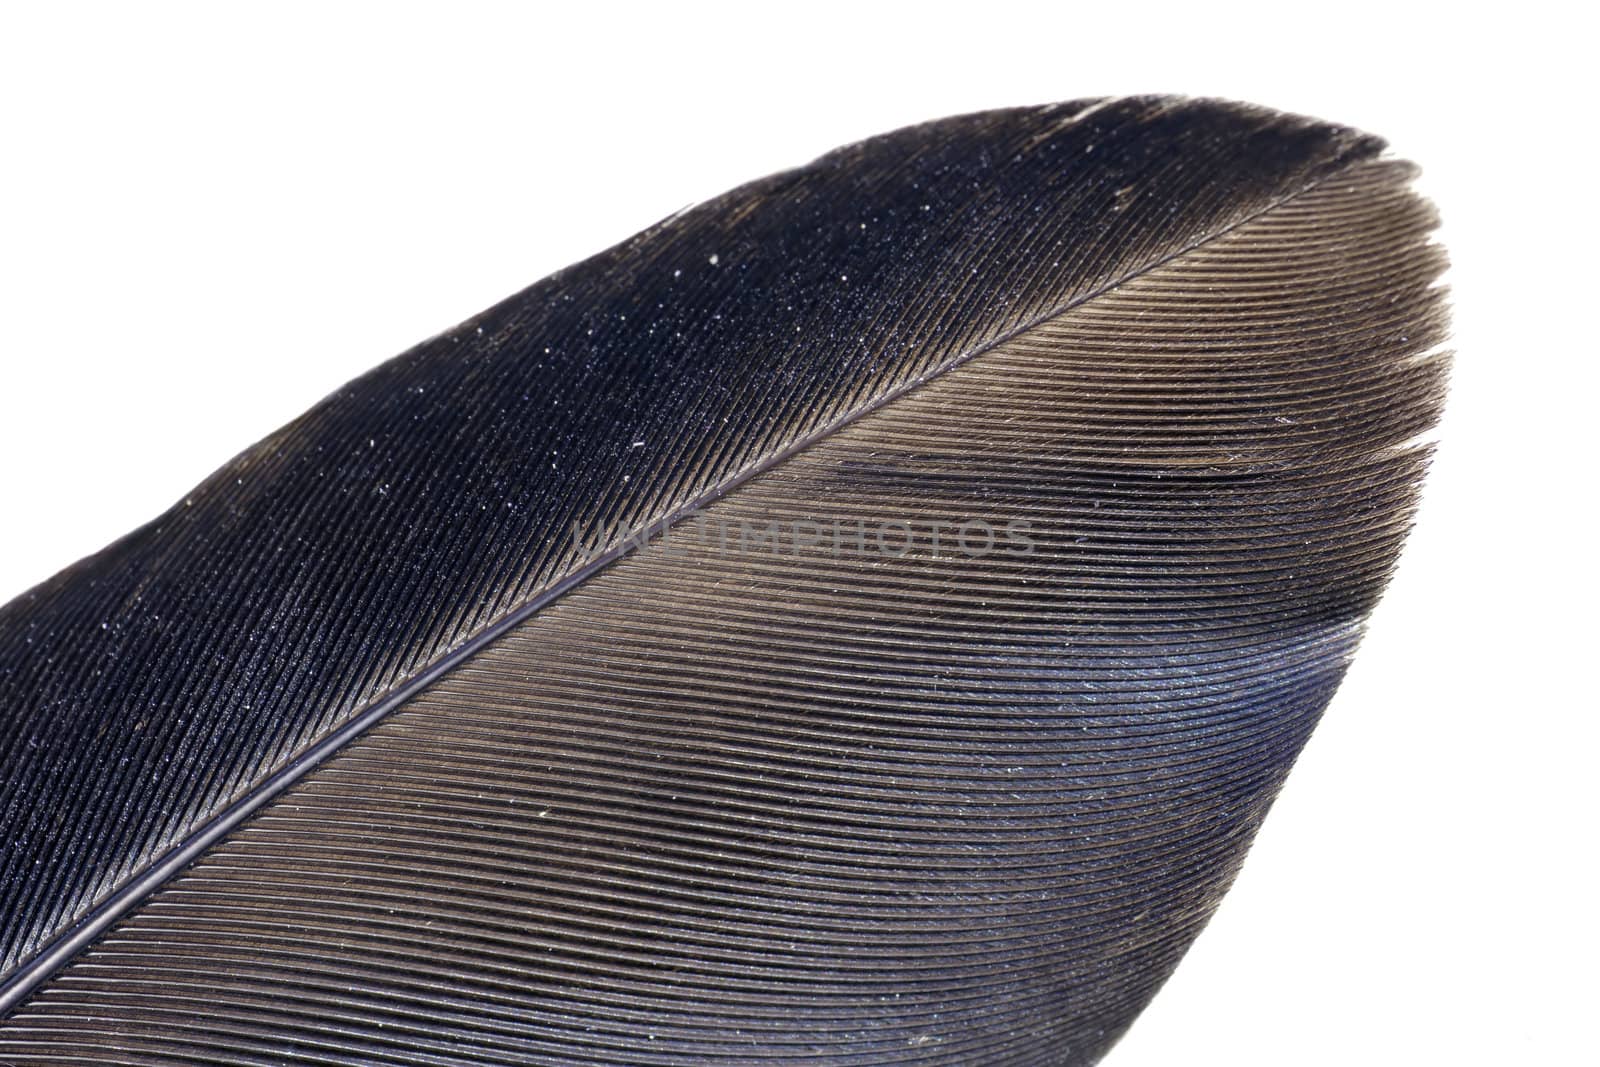 Very detailed macro of a crow's feather with barbs and barbules clearly visible, oil on feather refracts spectrum on part of it.